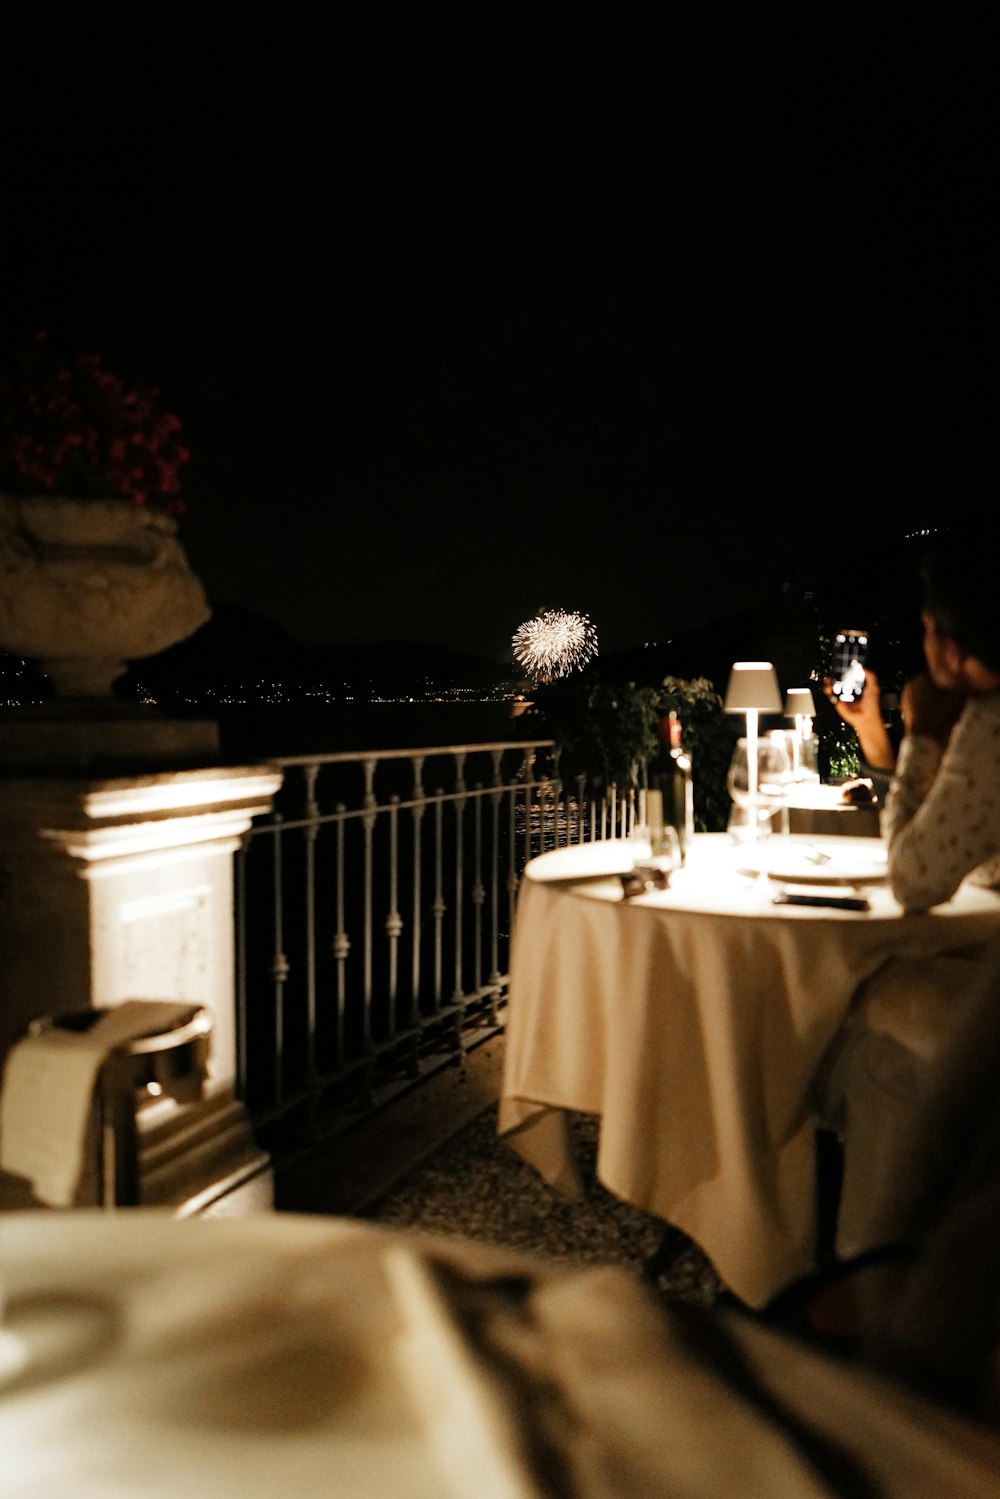 a person sitting at a table on a balcony at night